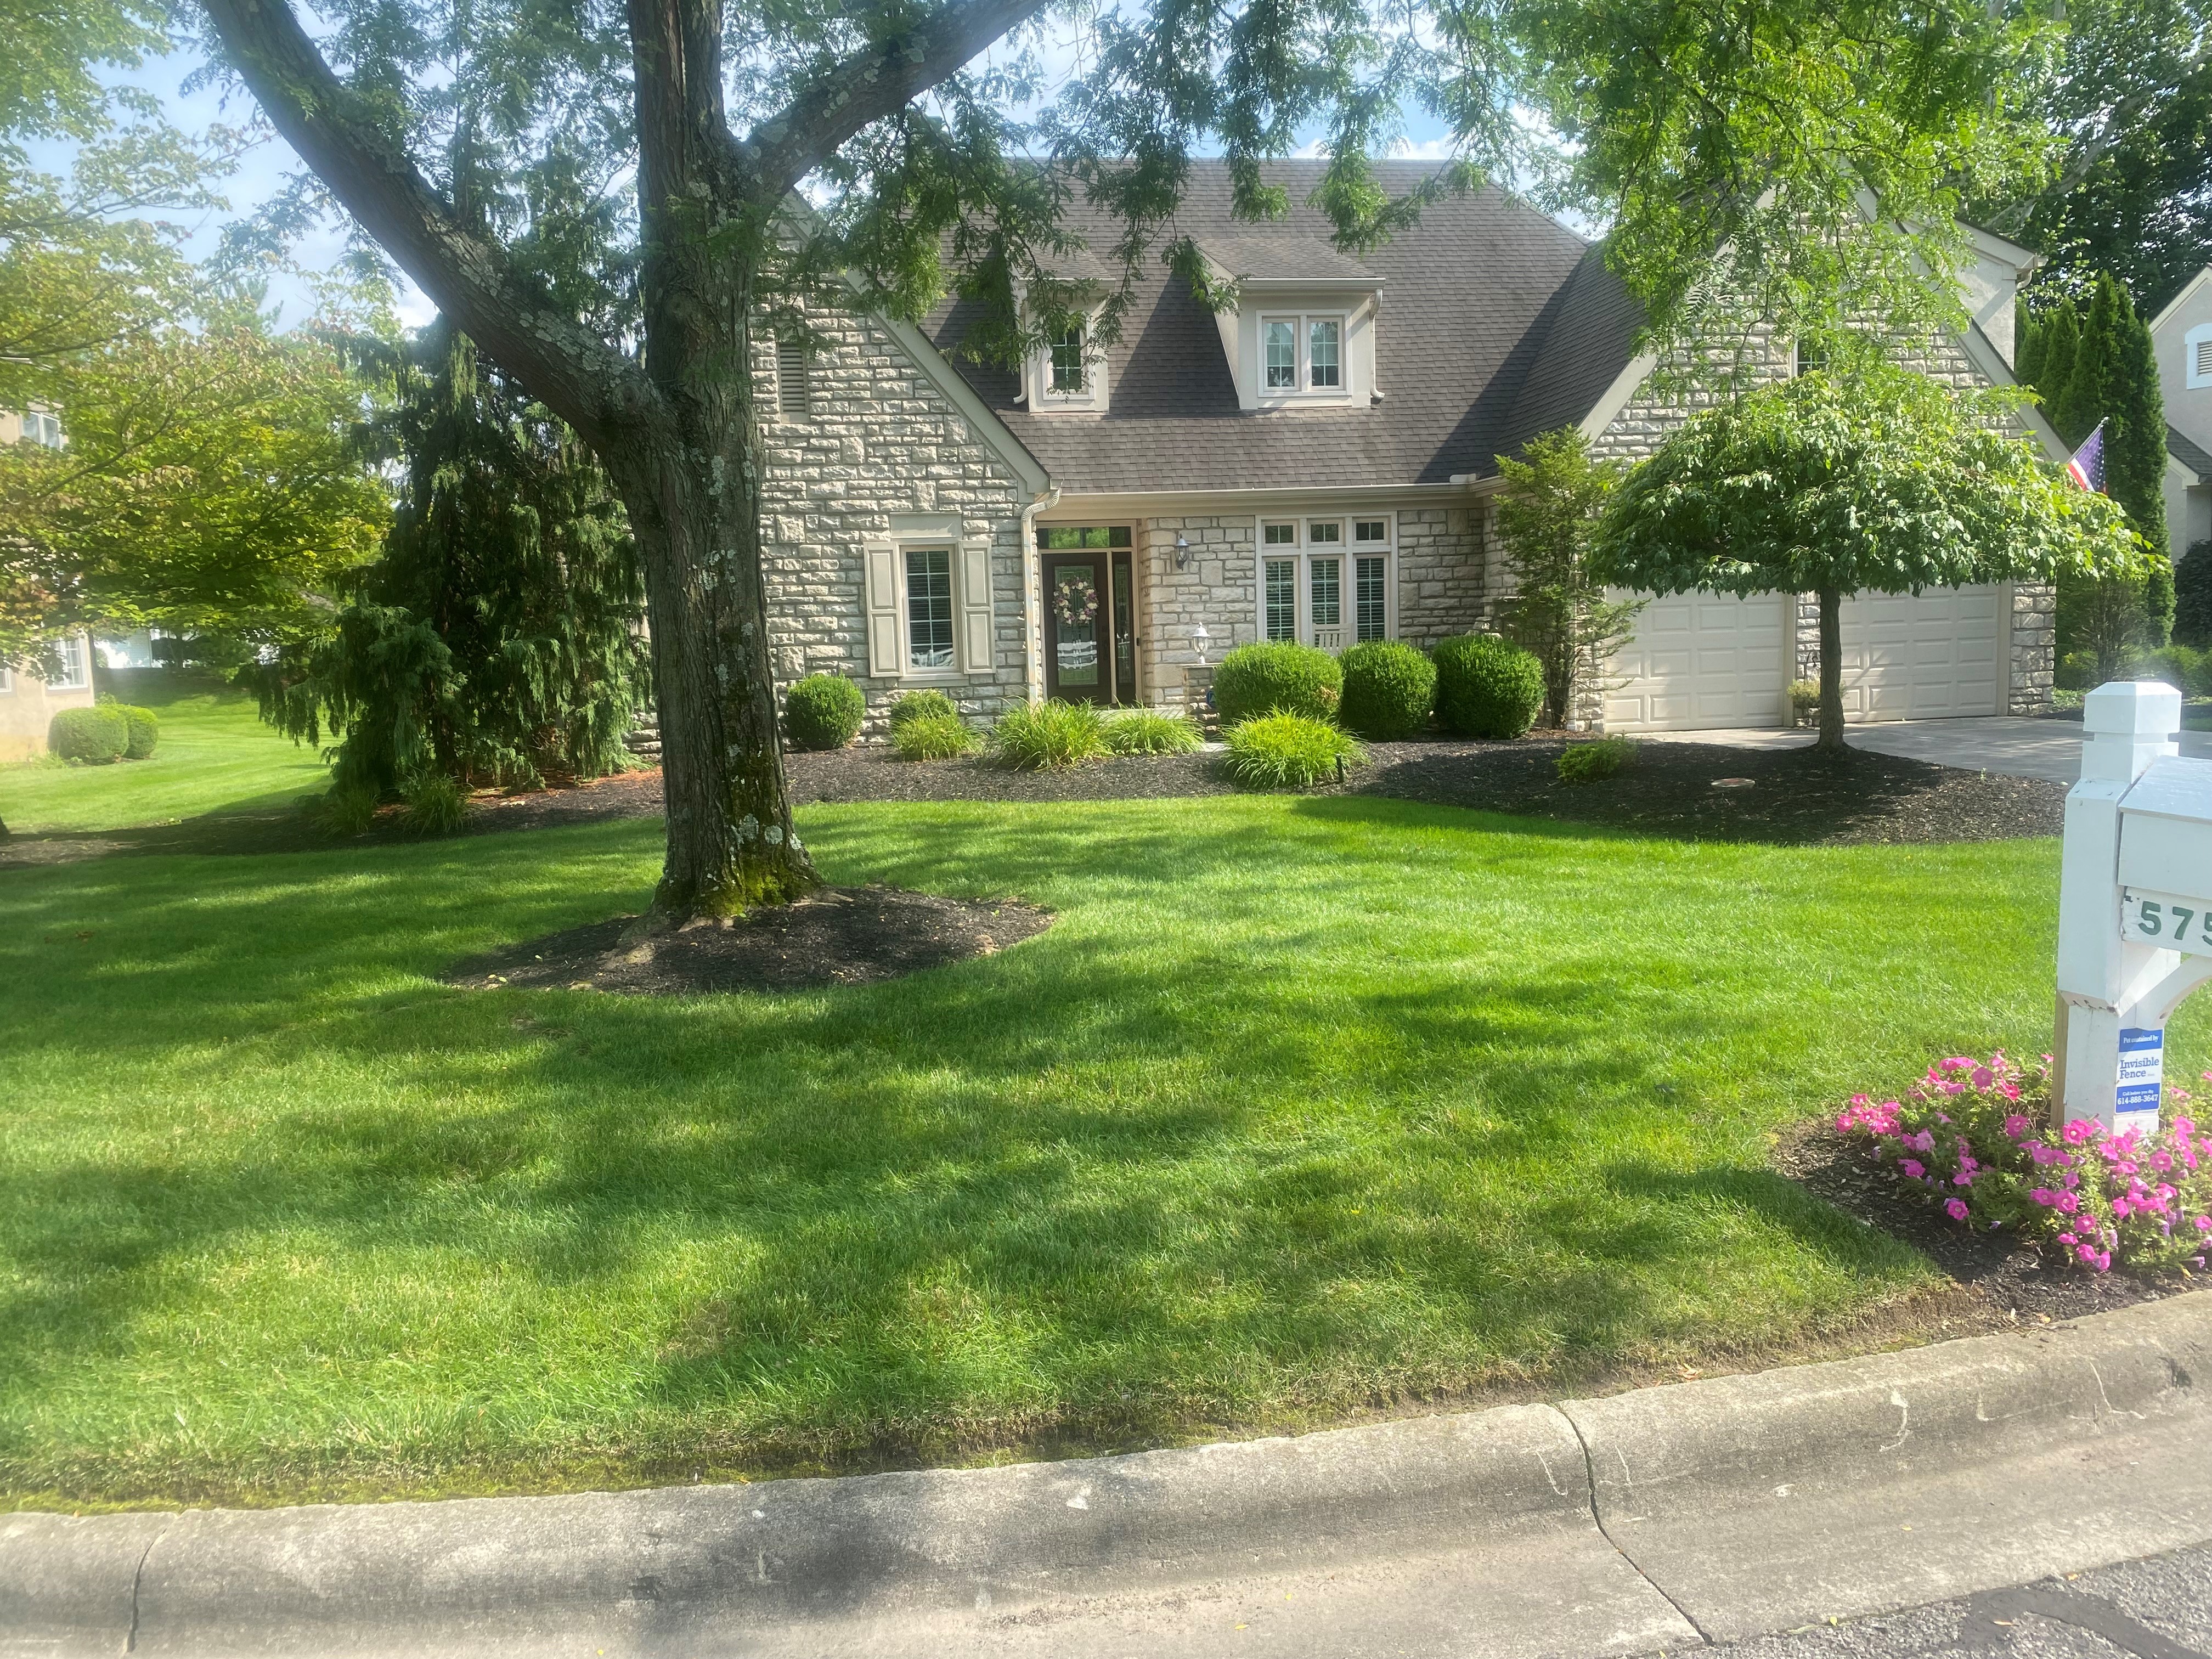 Westerville, Ohio Lawn Fertilization & Weed Control Success Story: NutriLawn’s Remarkable Transformation